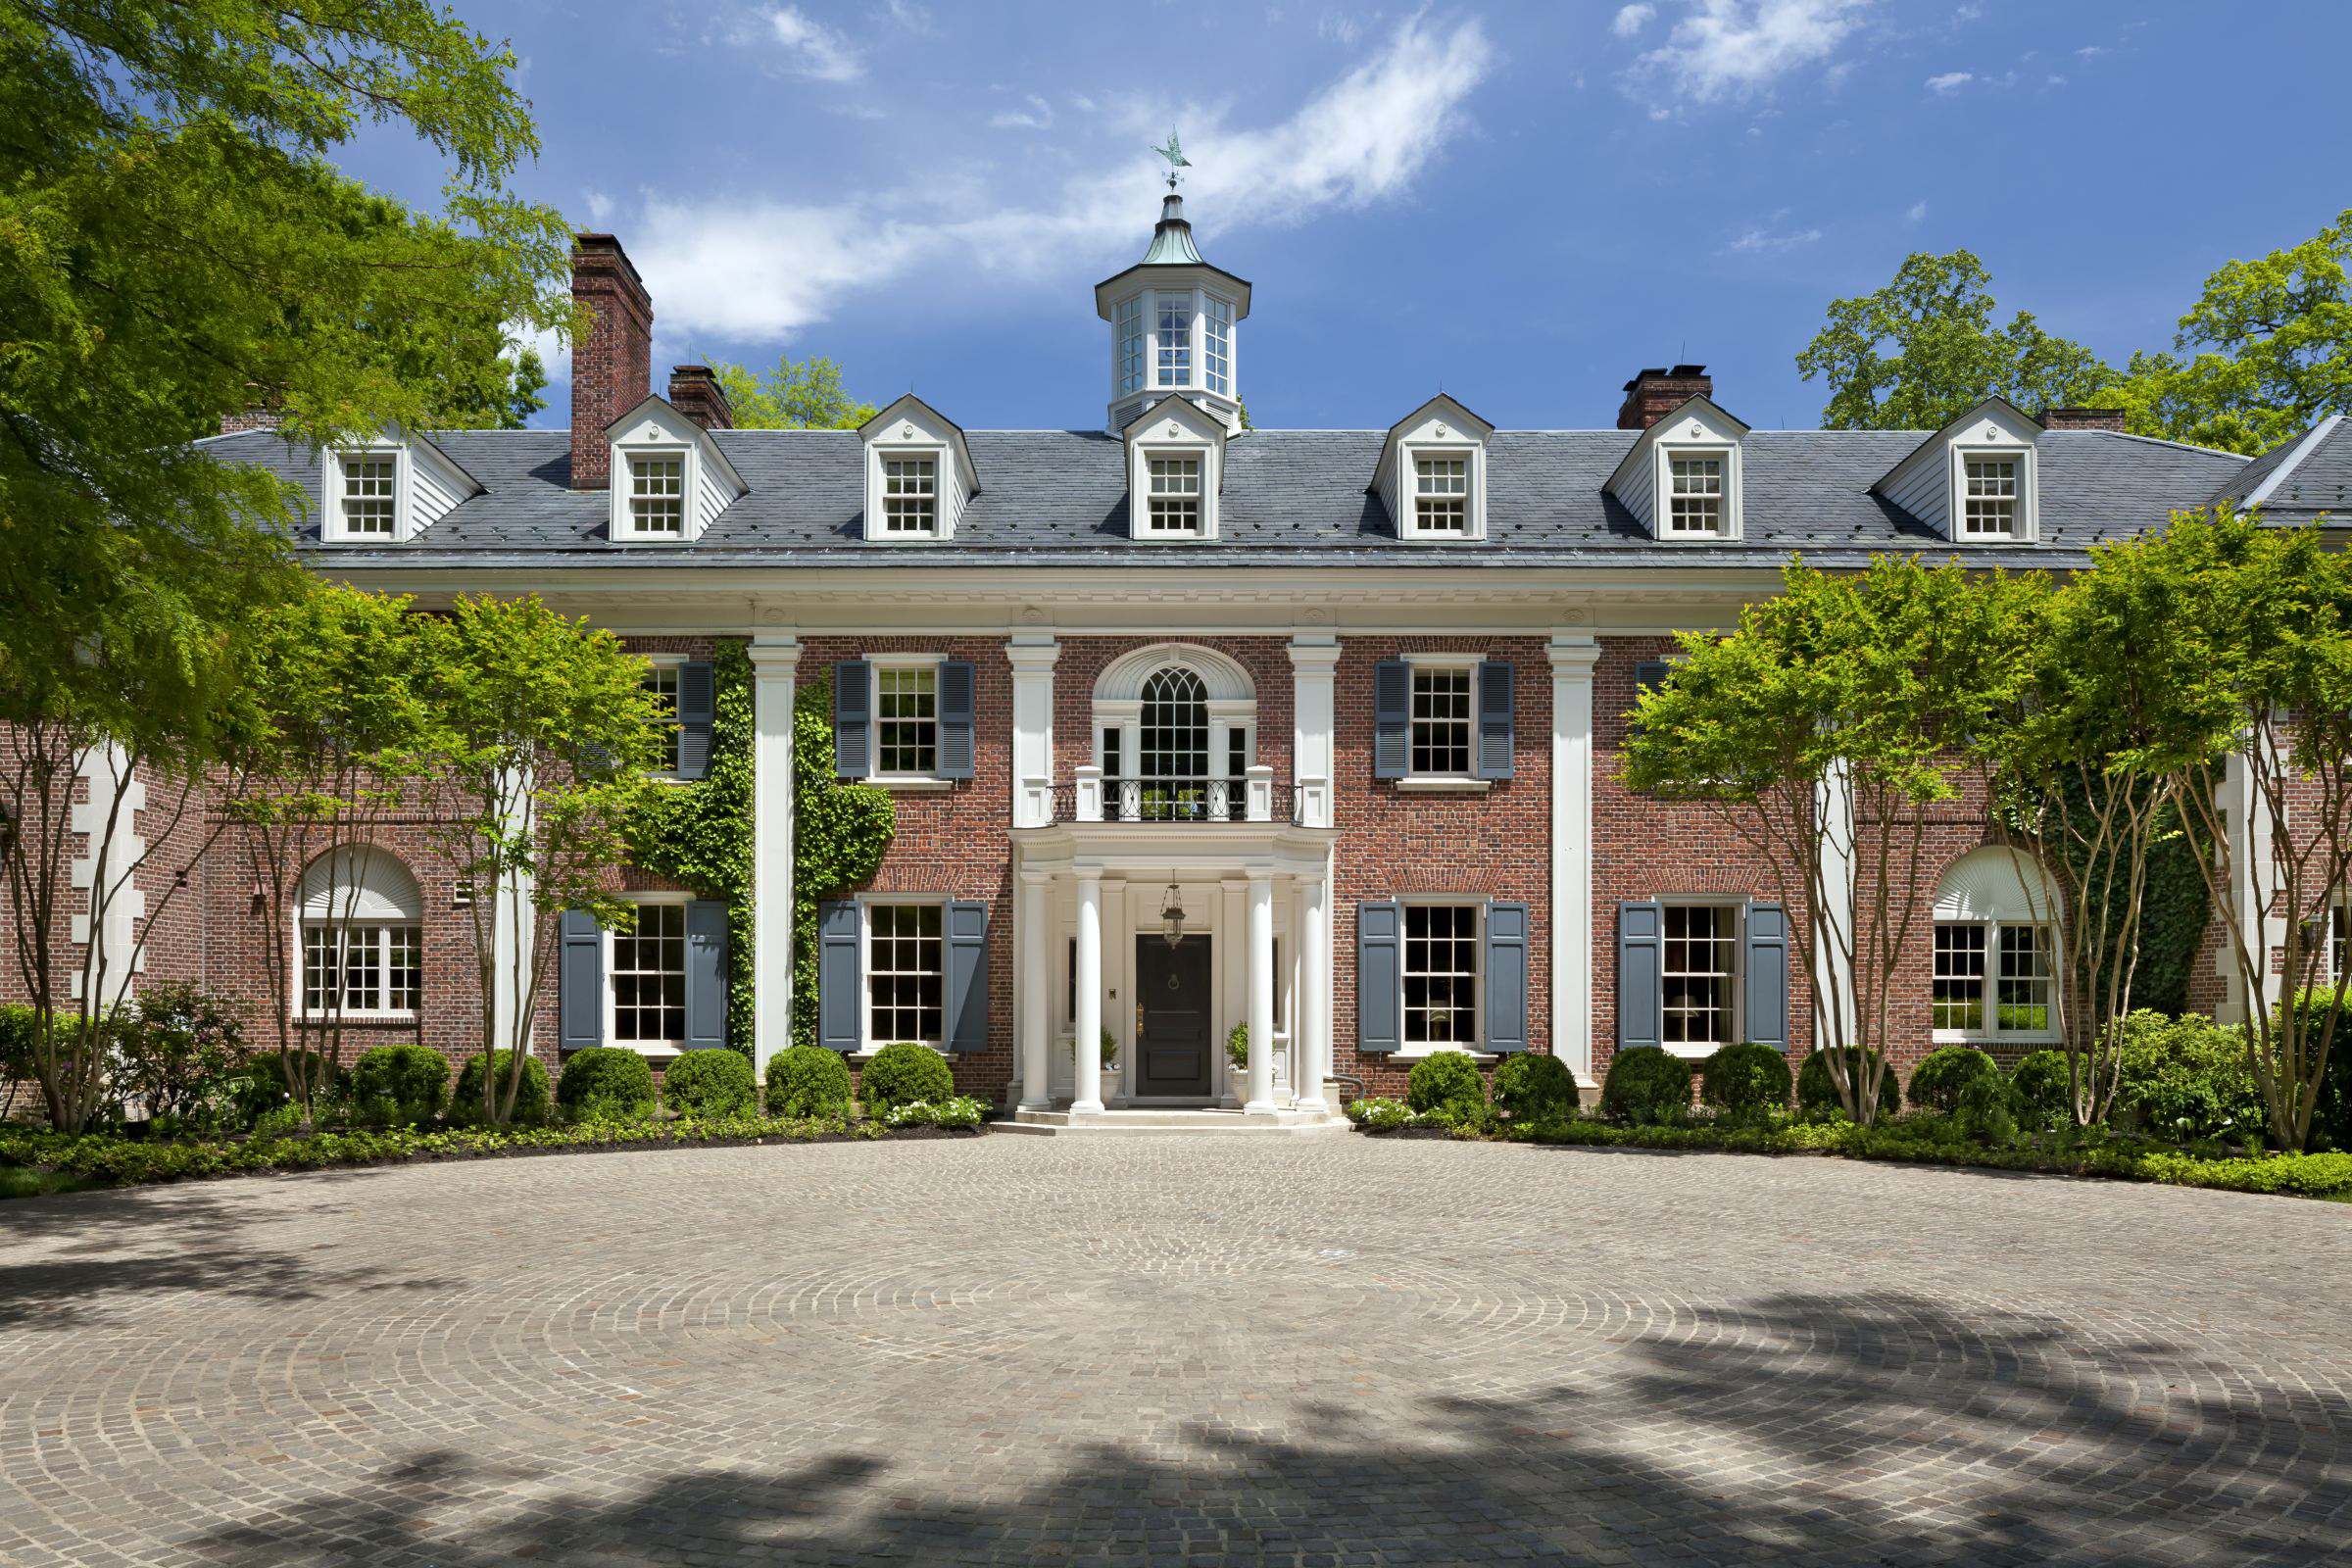 PHOTO: An outdoor look at Jacqueline Kennedy Onassis' childhood home in McLean, Virginia, on the market for $49.5 million.